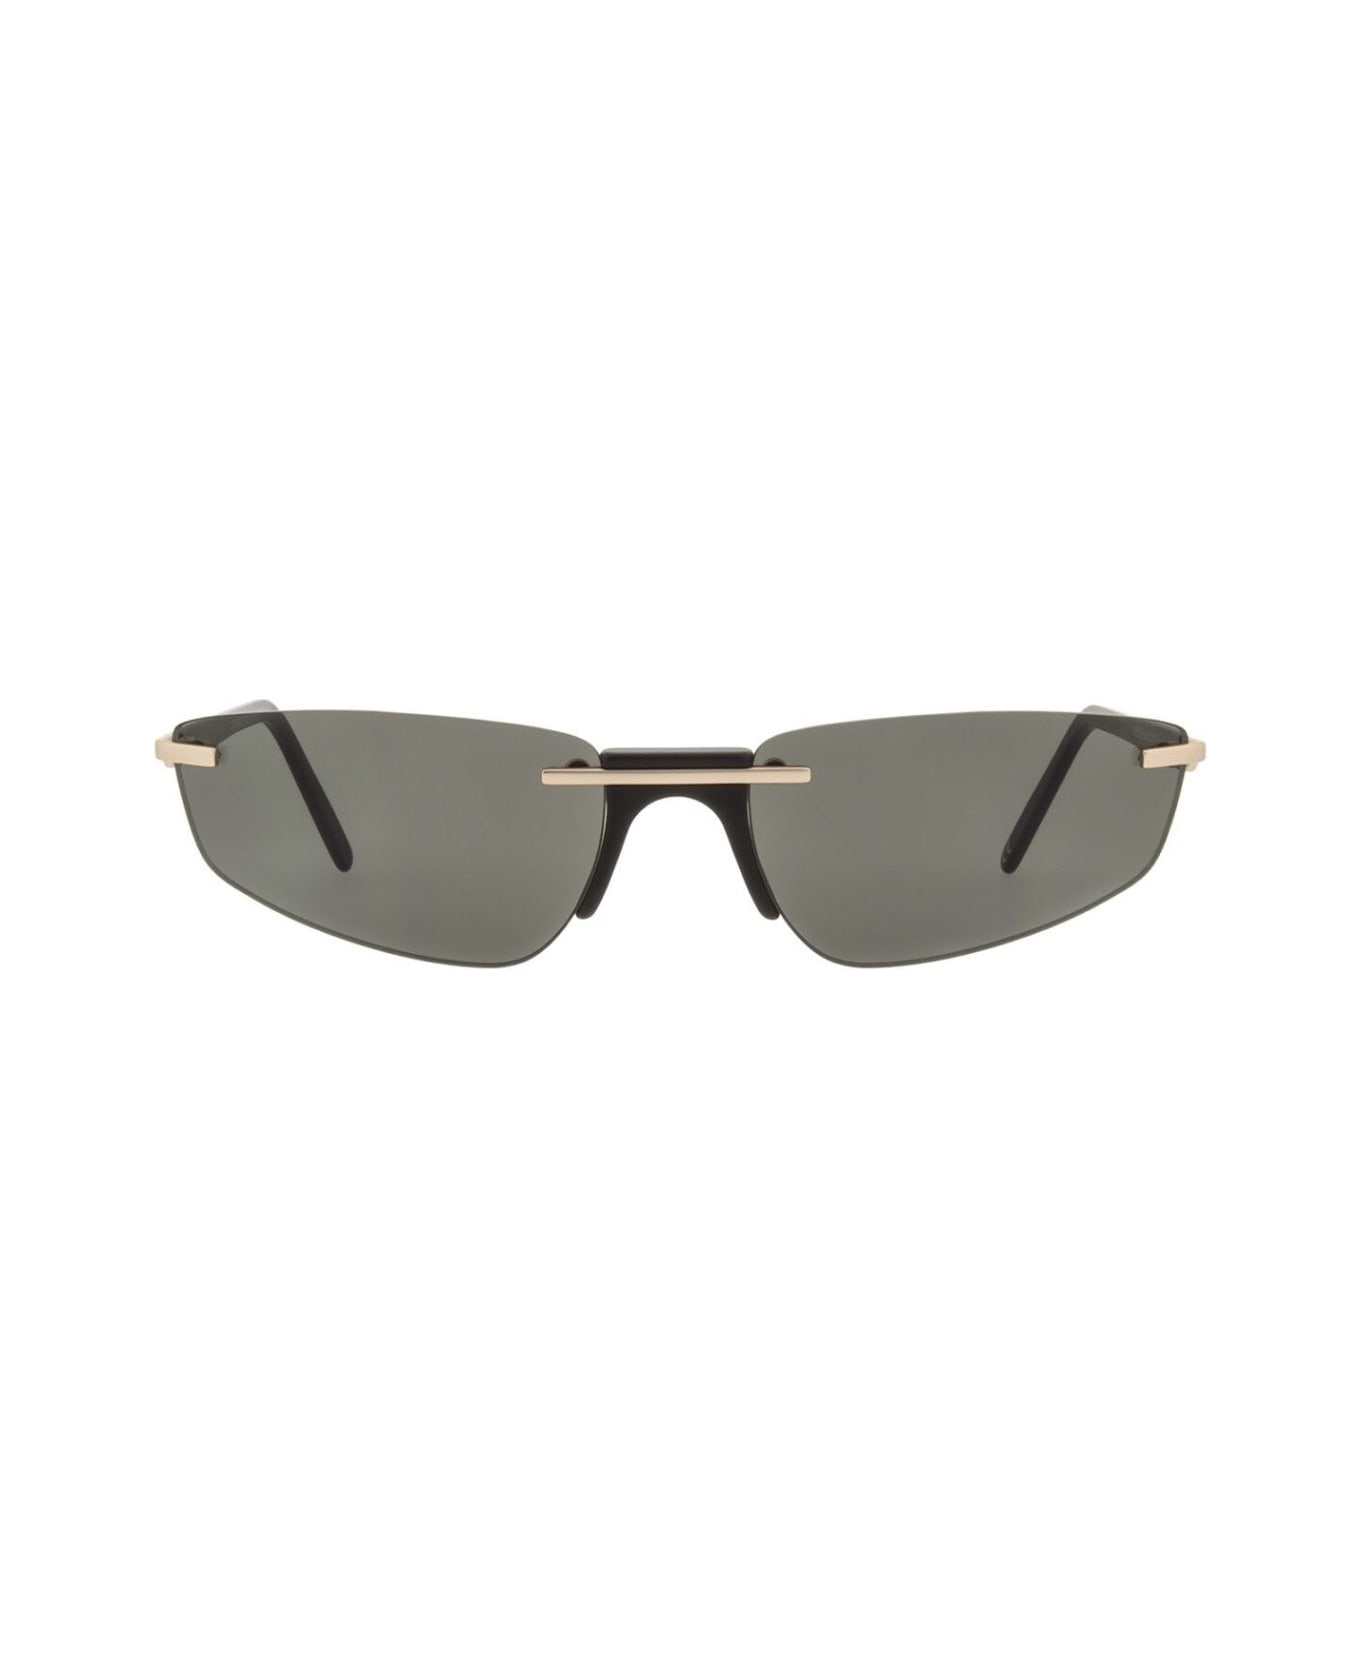 Andy Wolf Ophelia A Sunglasses - Black/gold